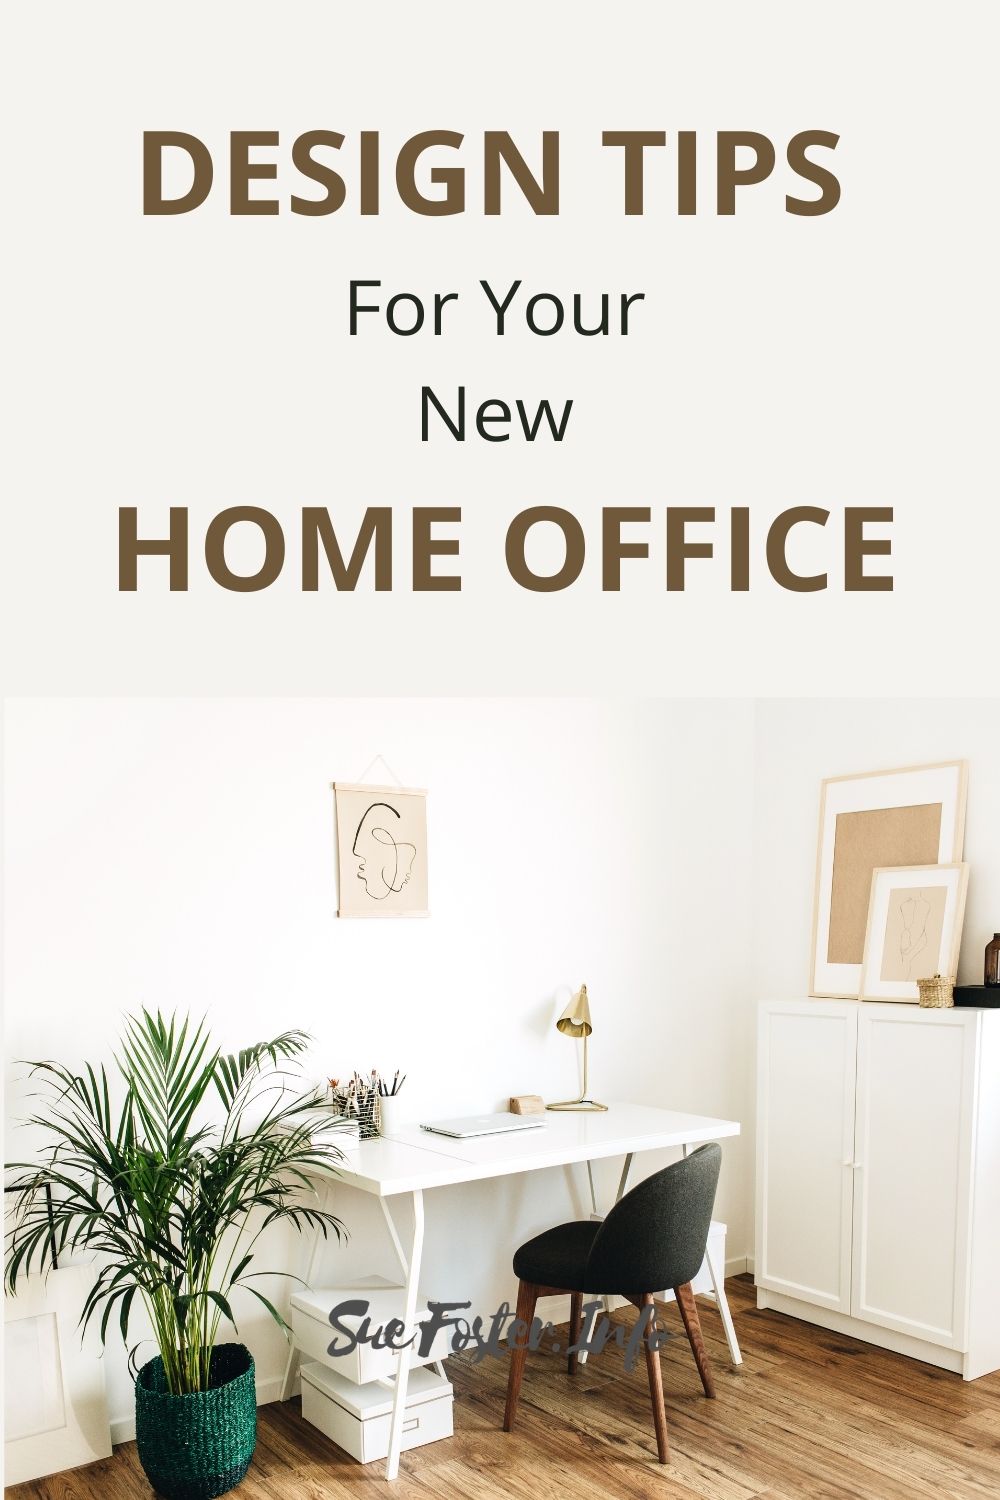 Design tips for your new home office